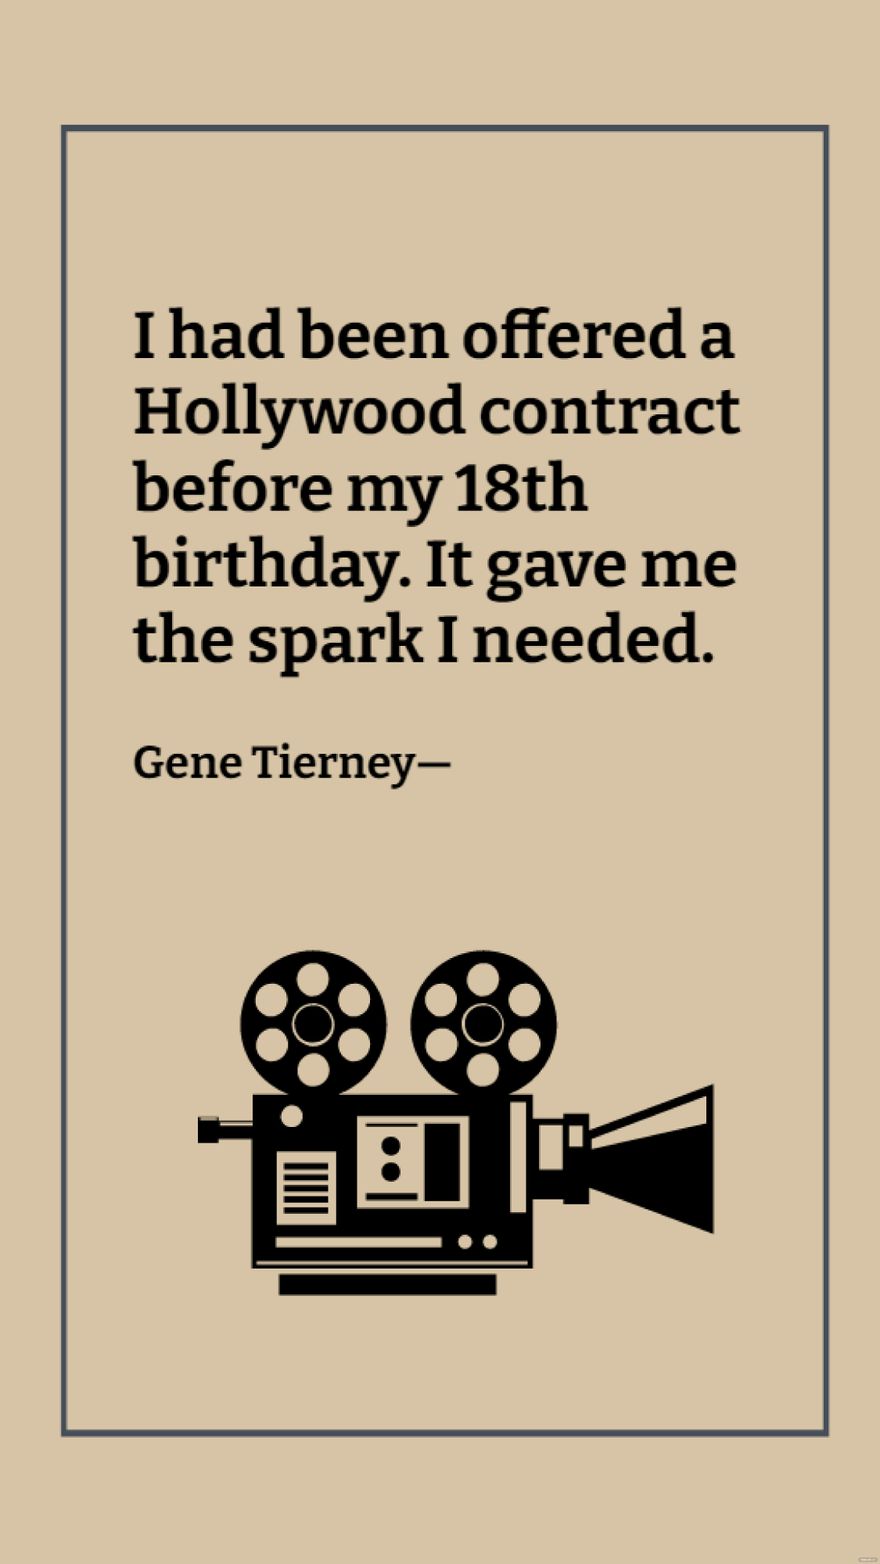 Gene Tierney - I had been offered a Hollywood contract before my 18th birthday. It gave me the spark I needed.